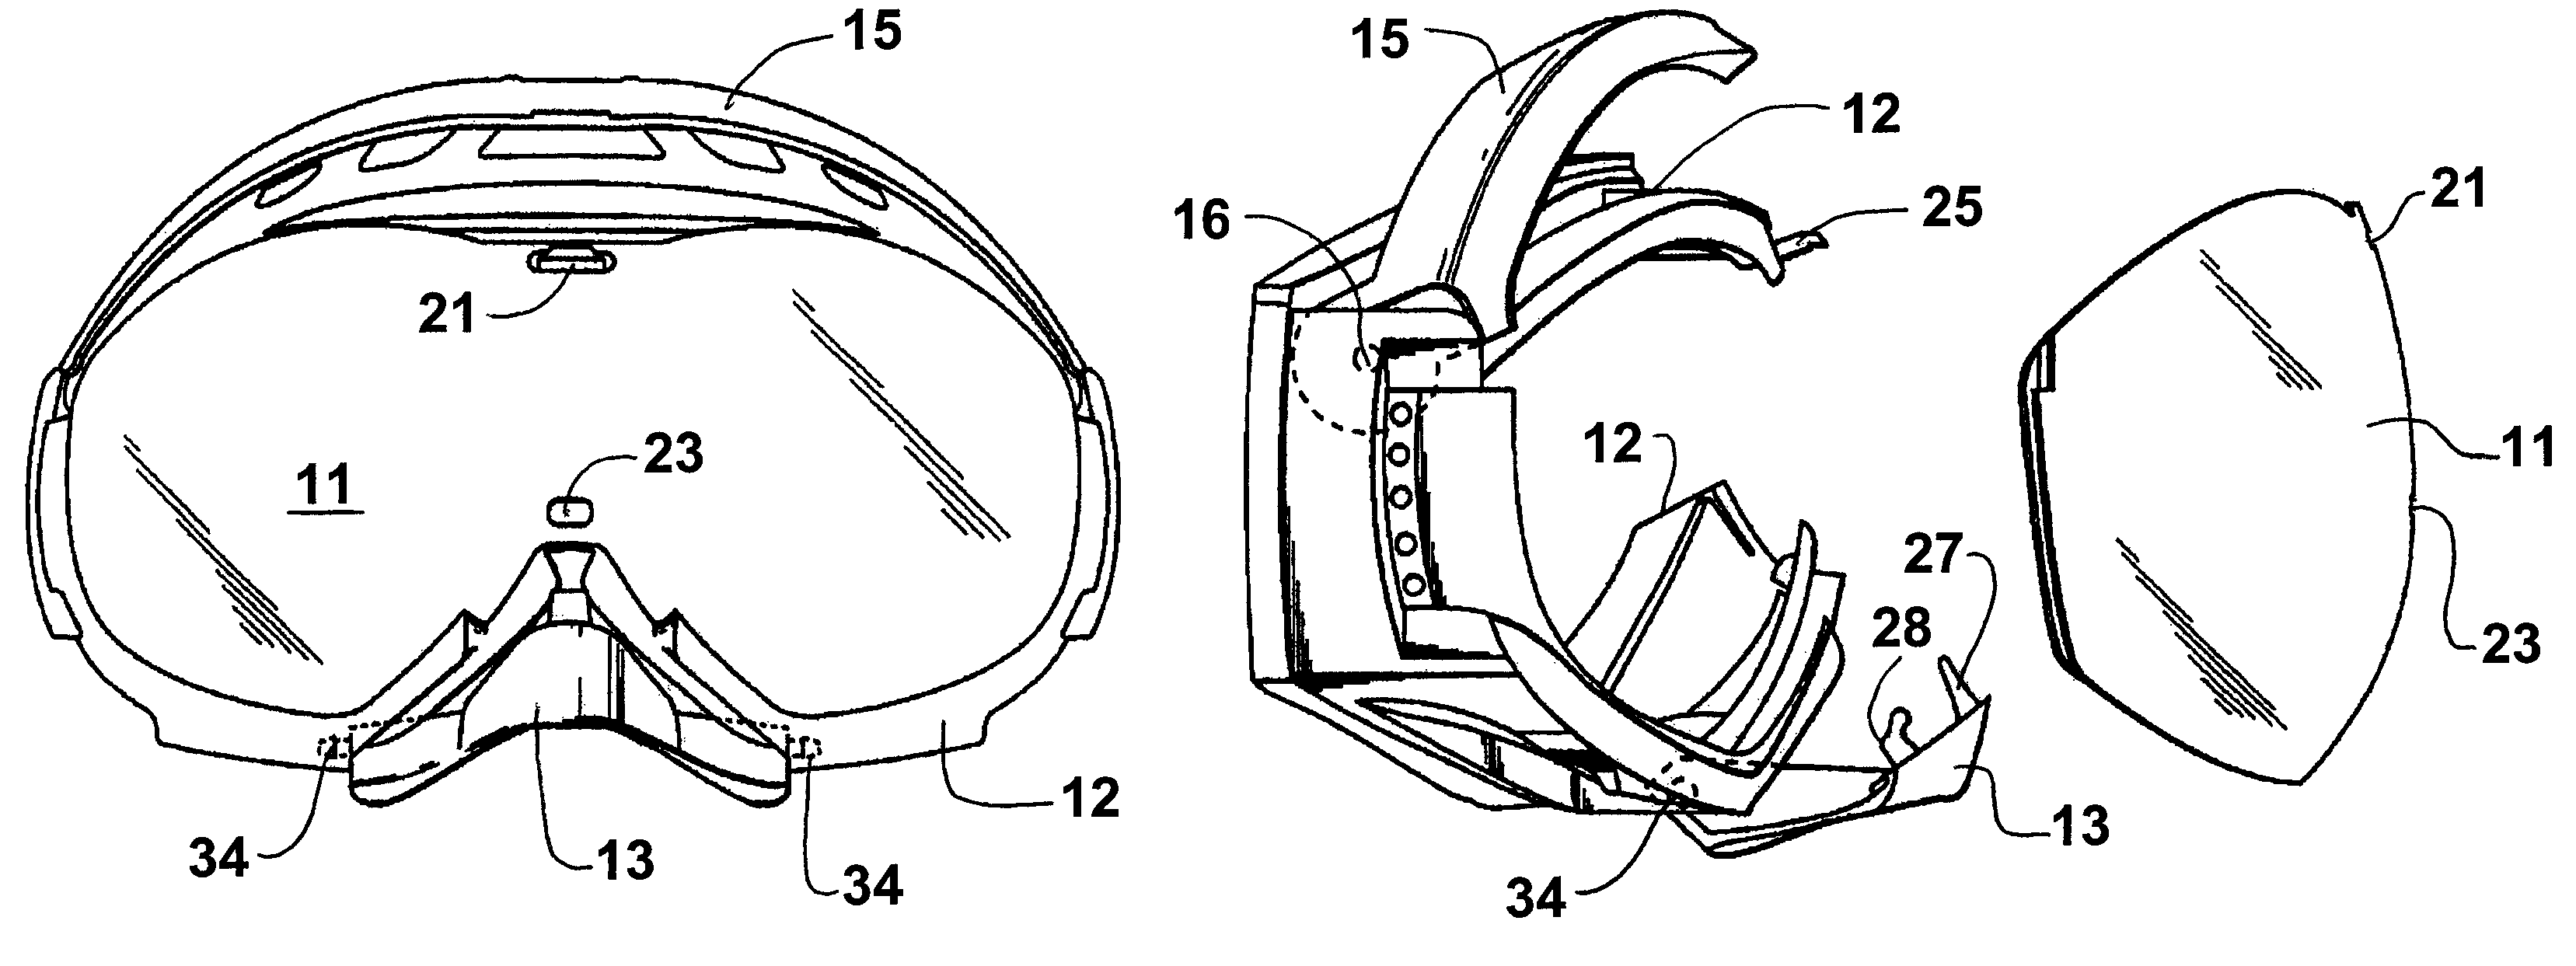 Goggles with interchangeable lens